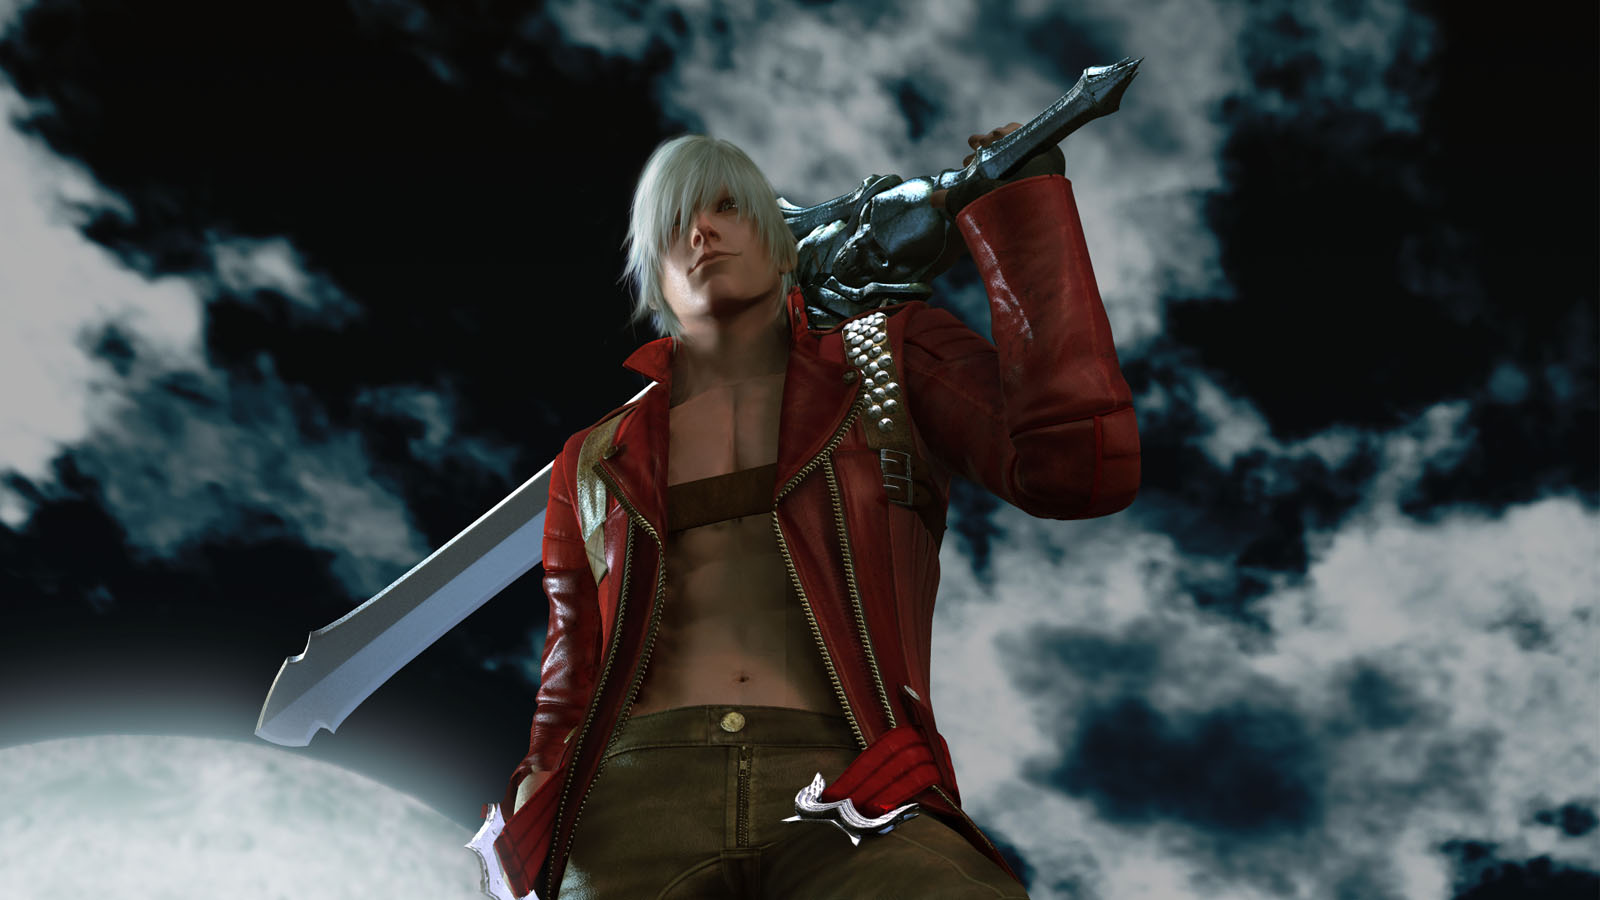 UPDATE: Devil May Cry 3 on Switch Has Exclusive Style Change System - IGN